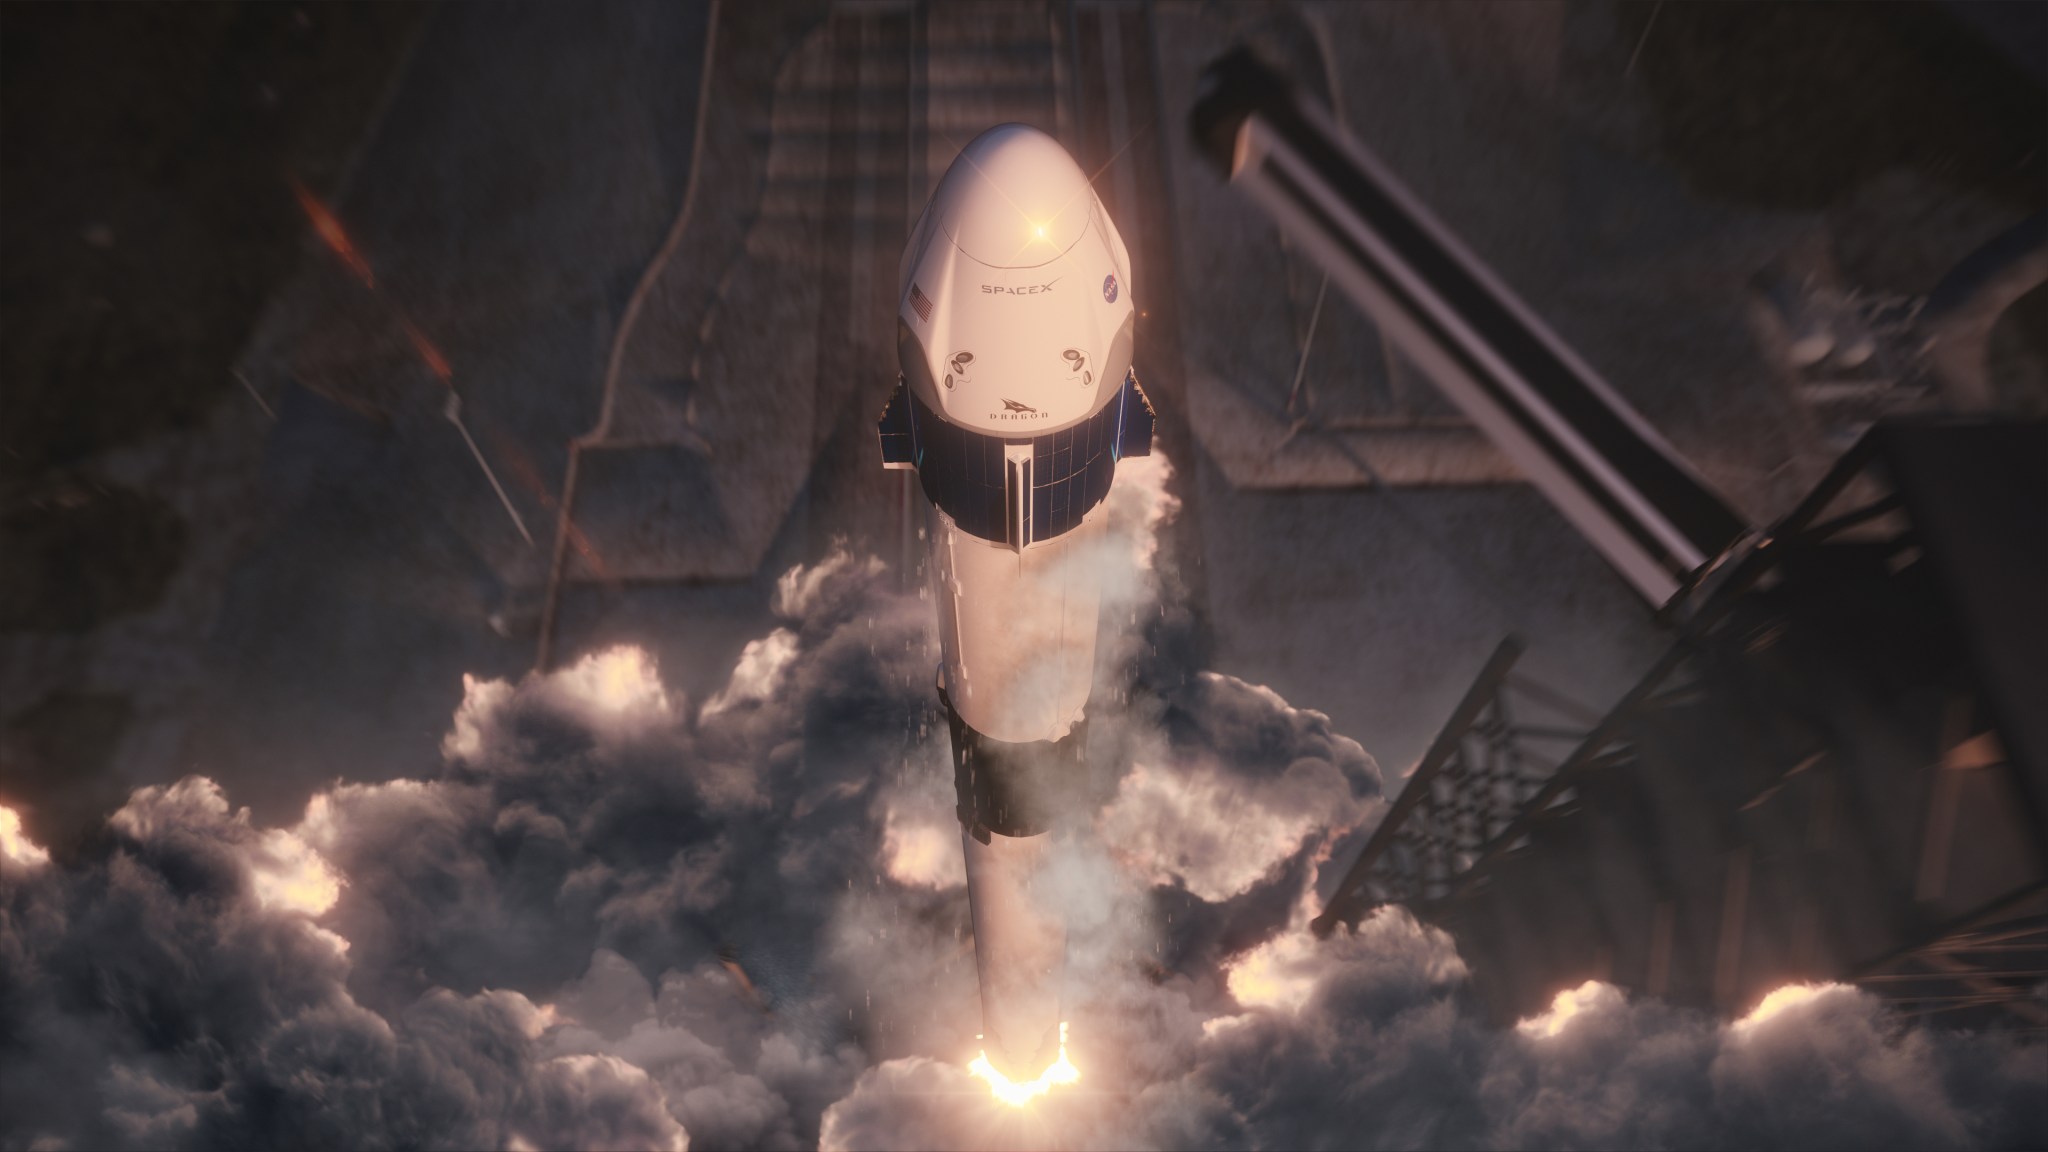 An artist concept of SpaceX’s Crew Dragon and Falcon 9 lifting off from Launch Complex 39A at Kennedy Space Center.